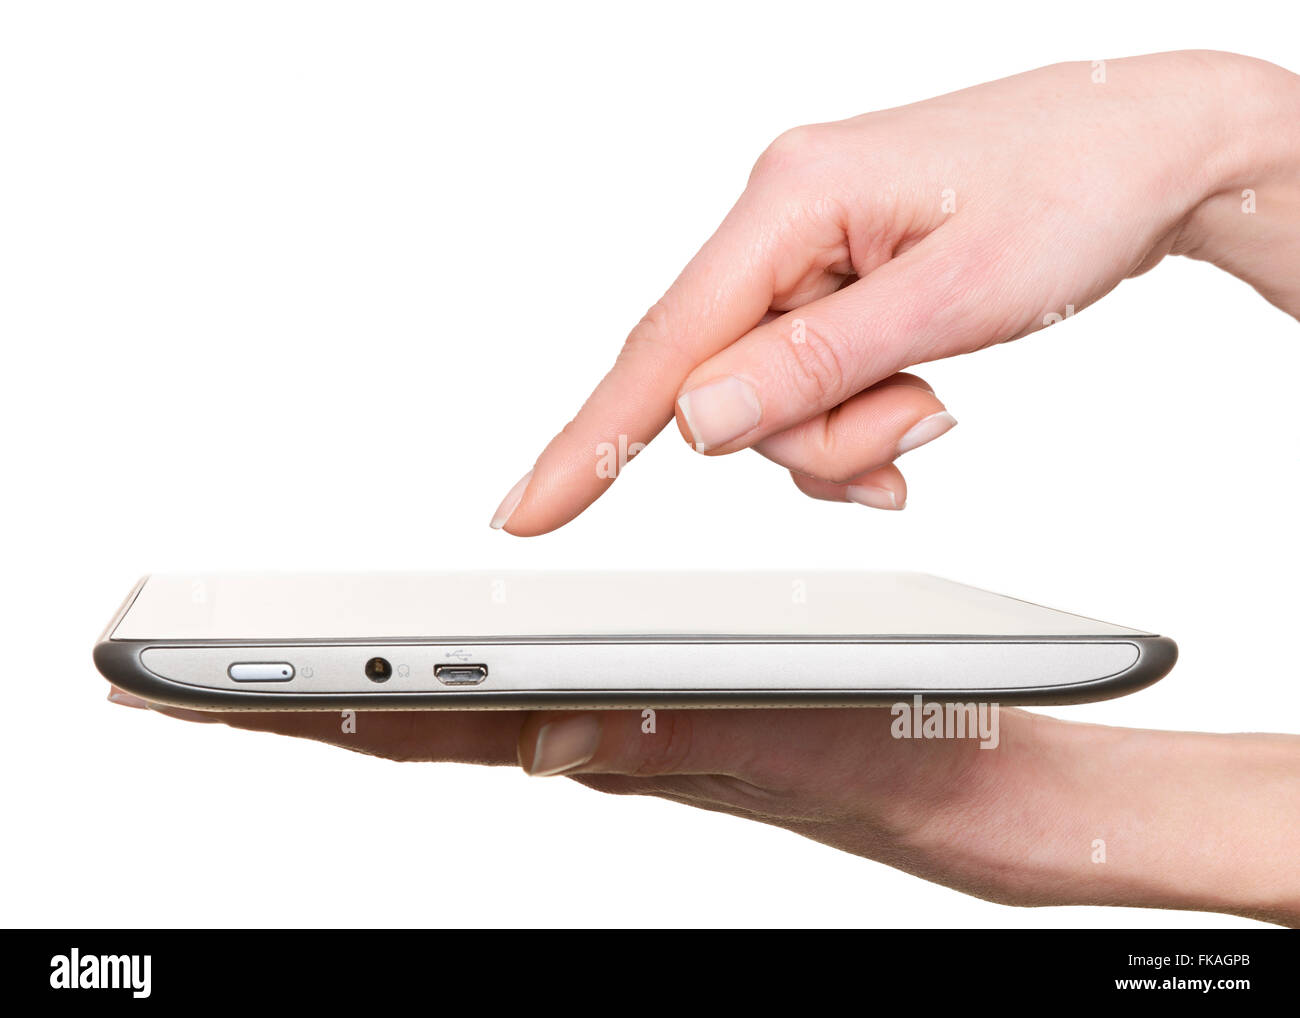 Finger Being Pointed on Tablet Screen Stock Photo - Image of operating,  mobility: 36194818